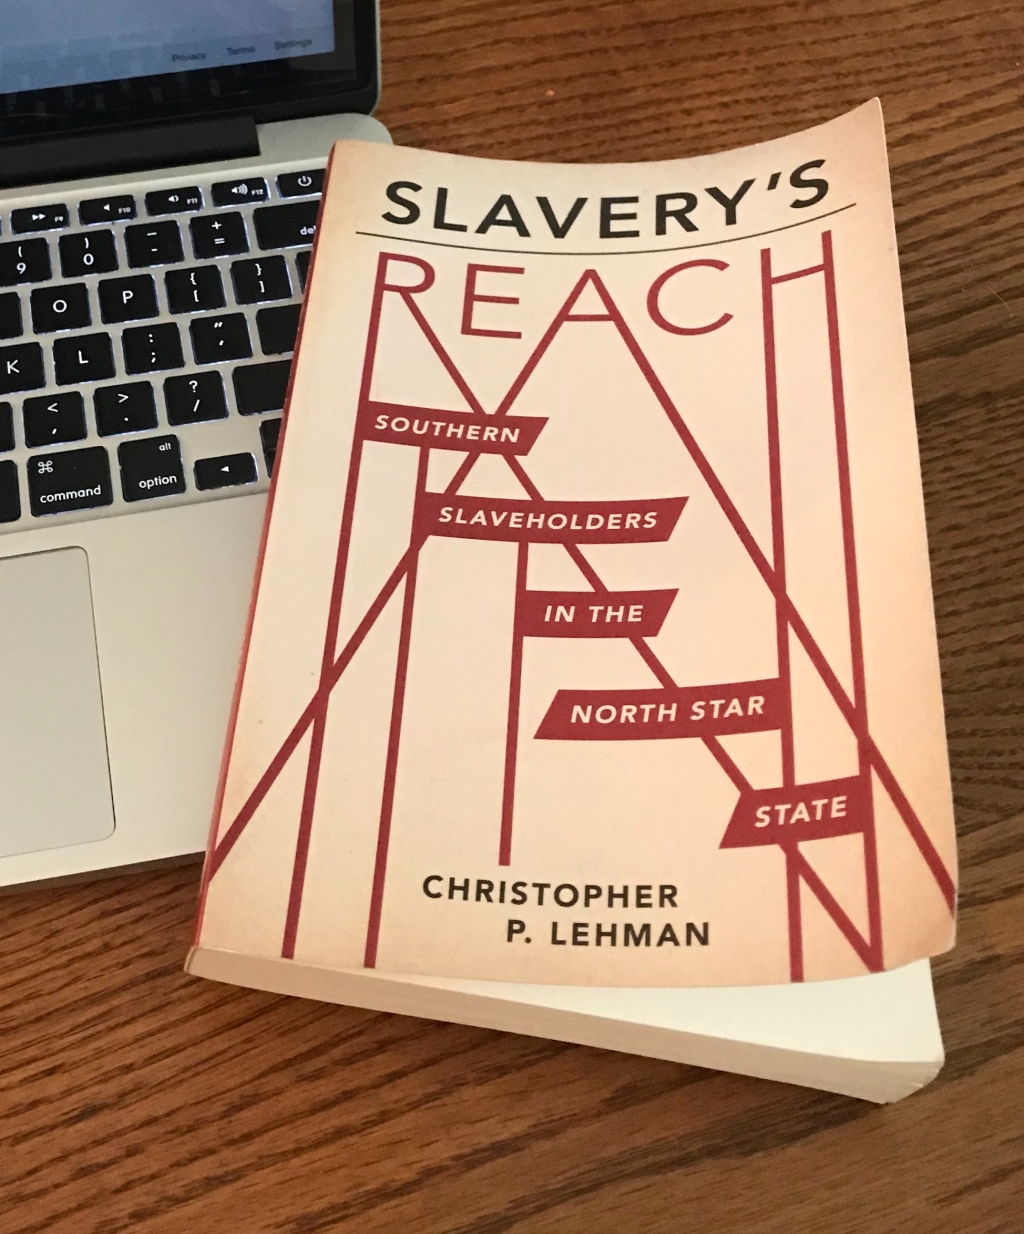 Why Slavery’s Reach is the Book I Needed Most*